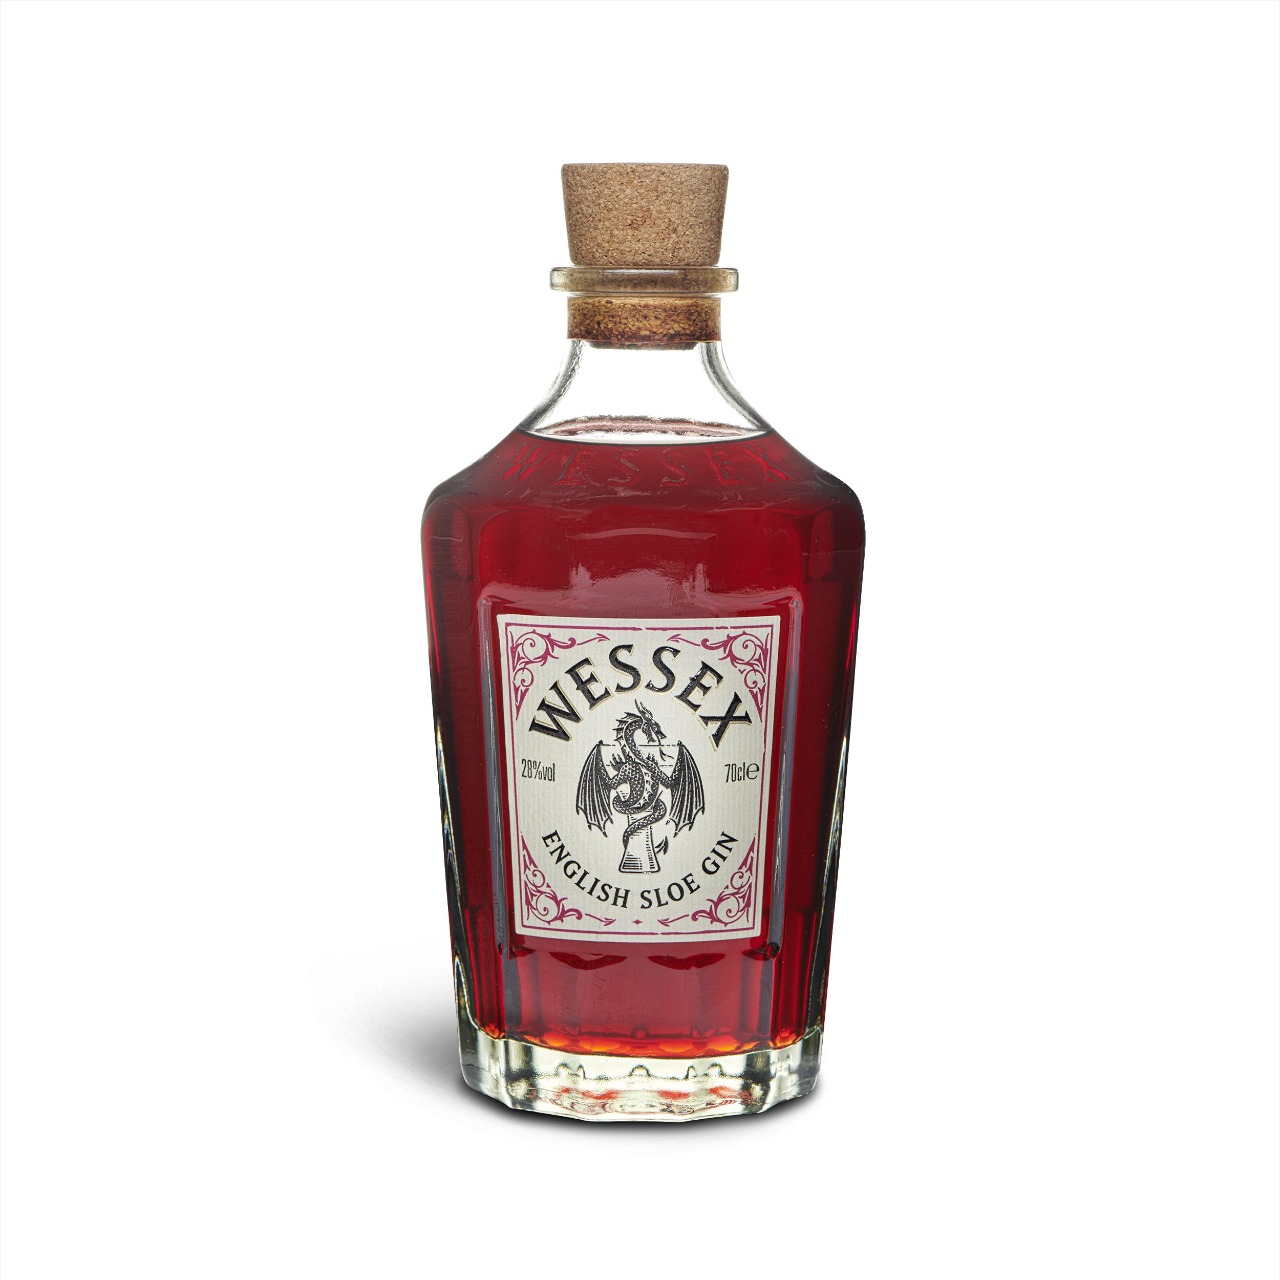 WESSEX ENGLISH SLOE GIN 70CL